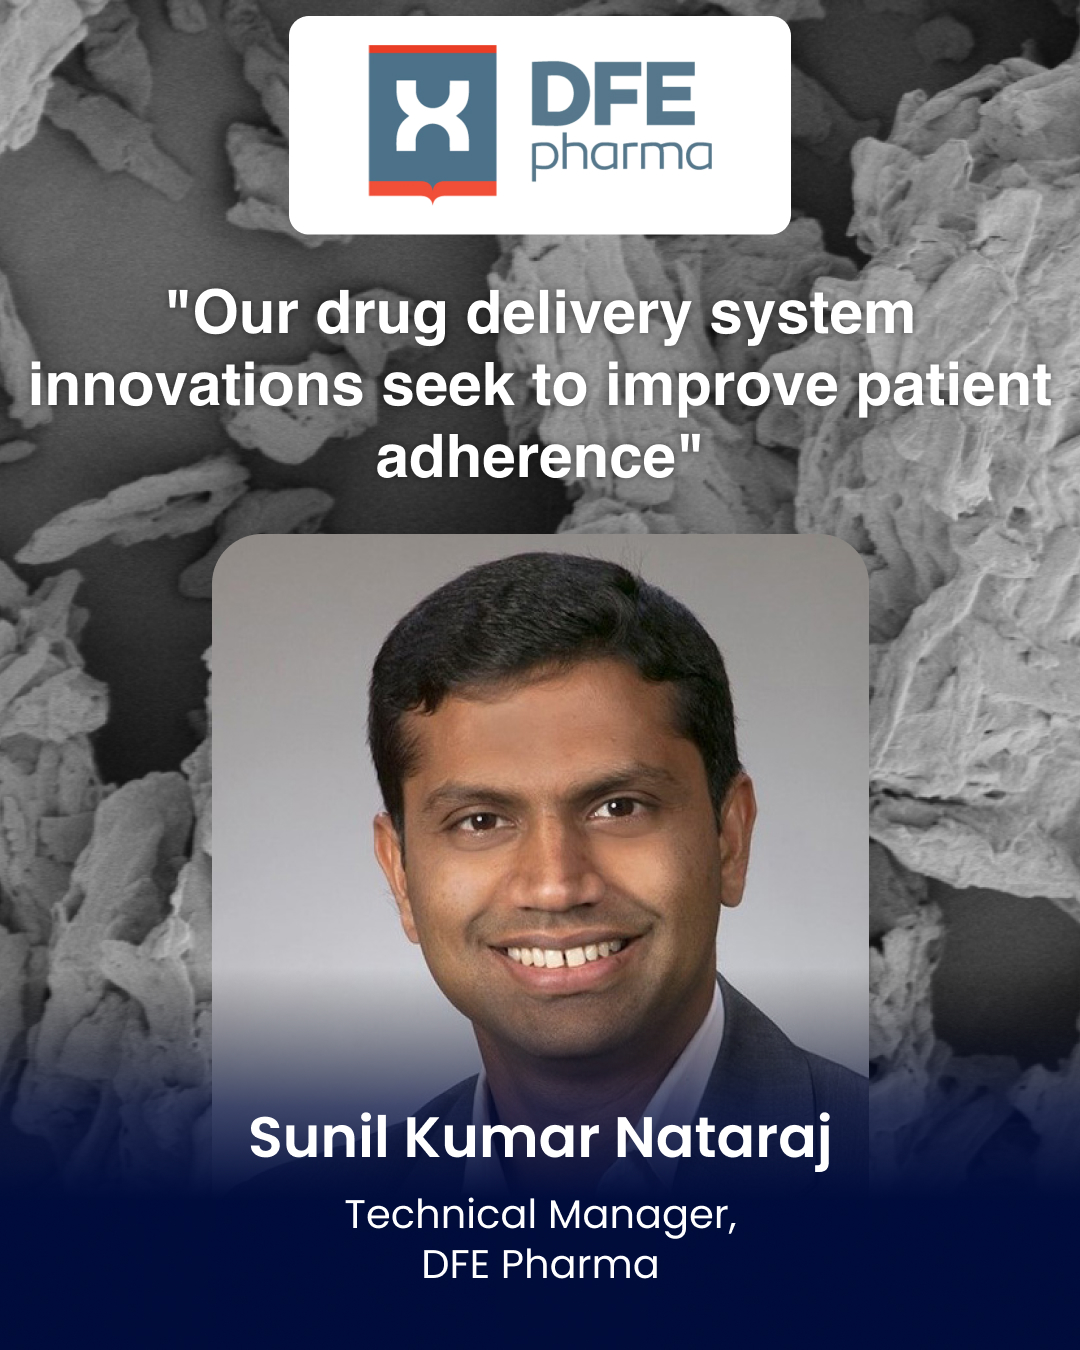 "Our drug delivery system innovations seek to improve patient adherence"